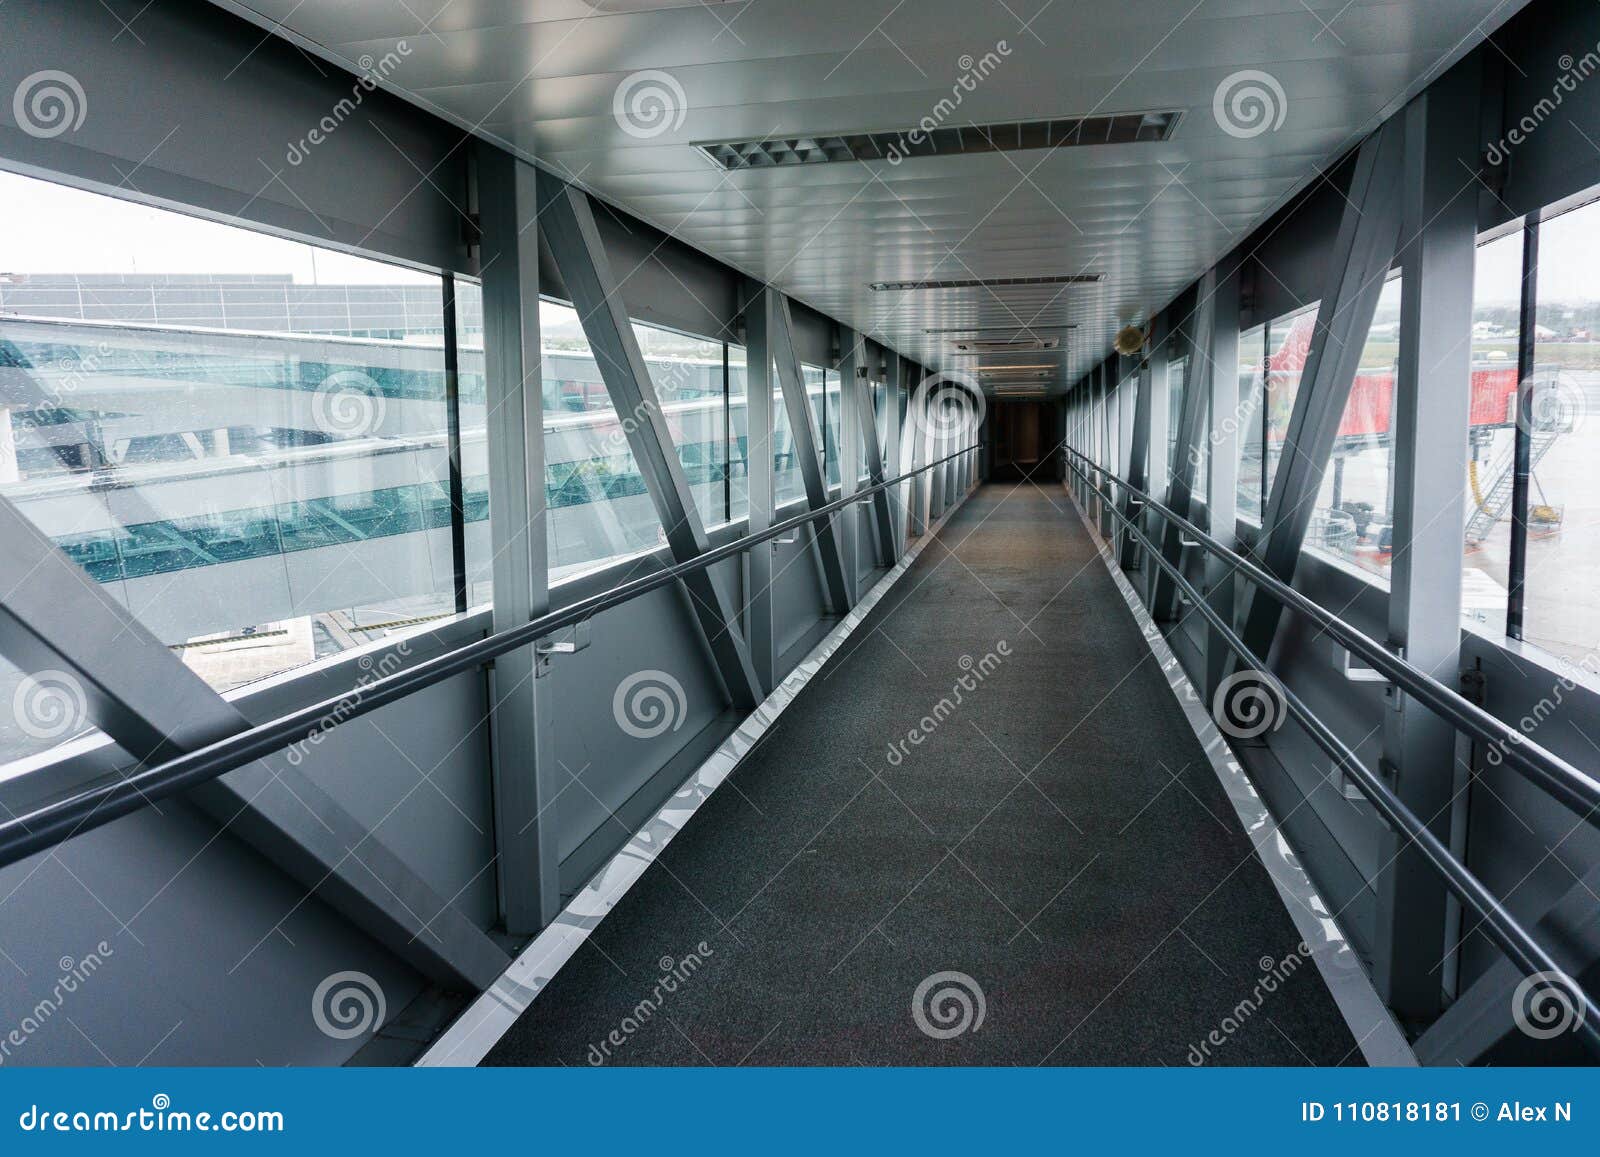 Image of Elevated Pedestrian Crossing Stock Image - Image of modern ...